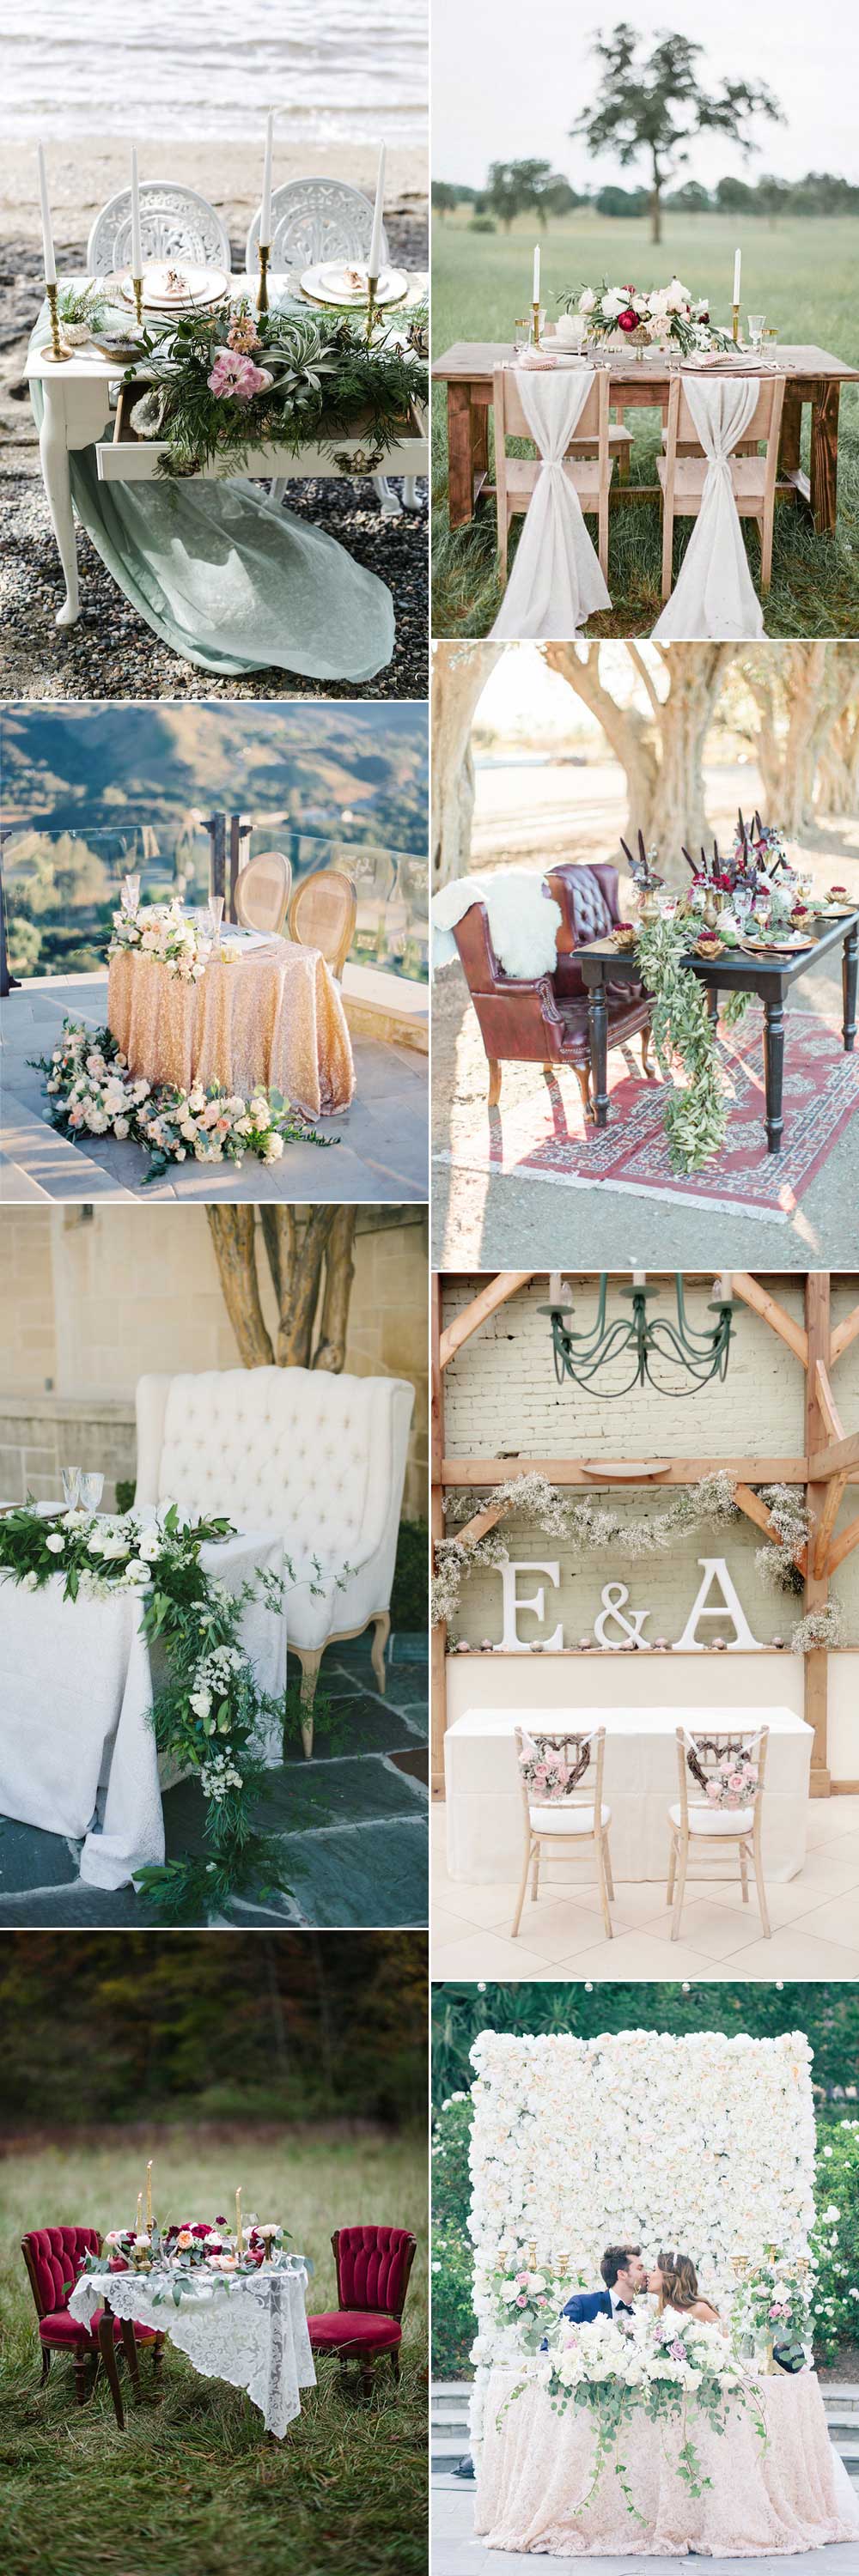 Ideas for wedding tables for two